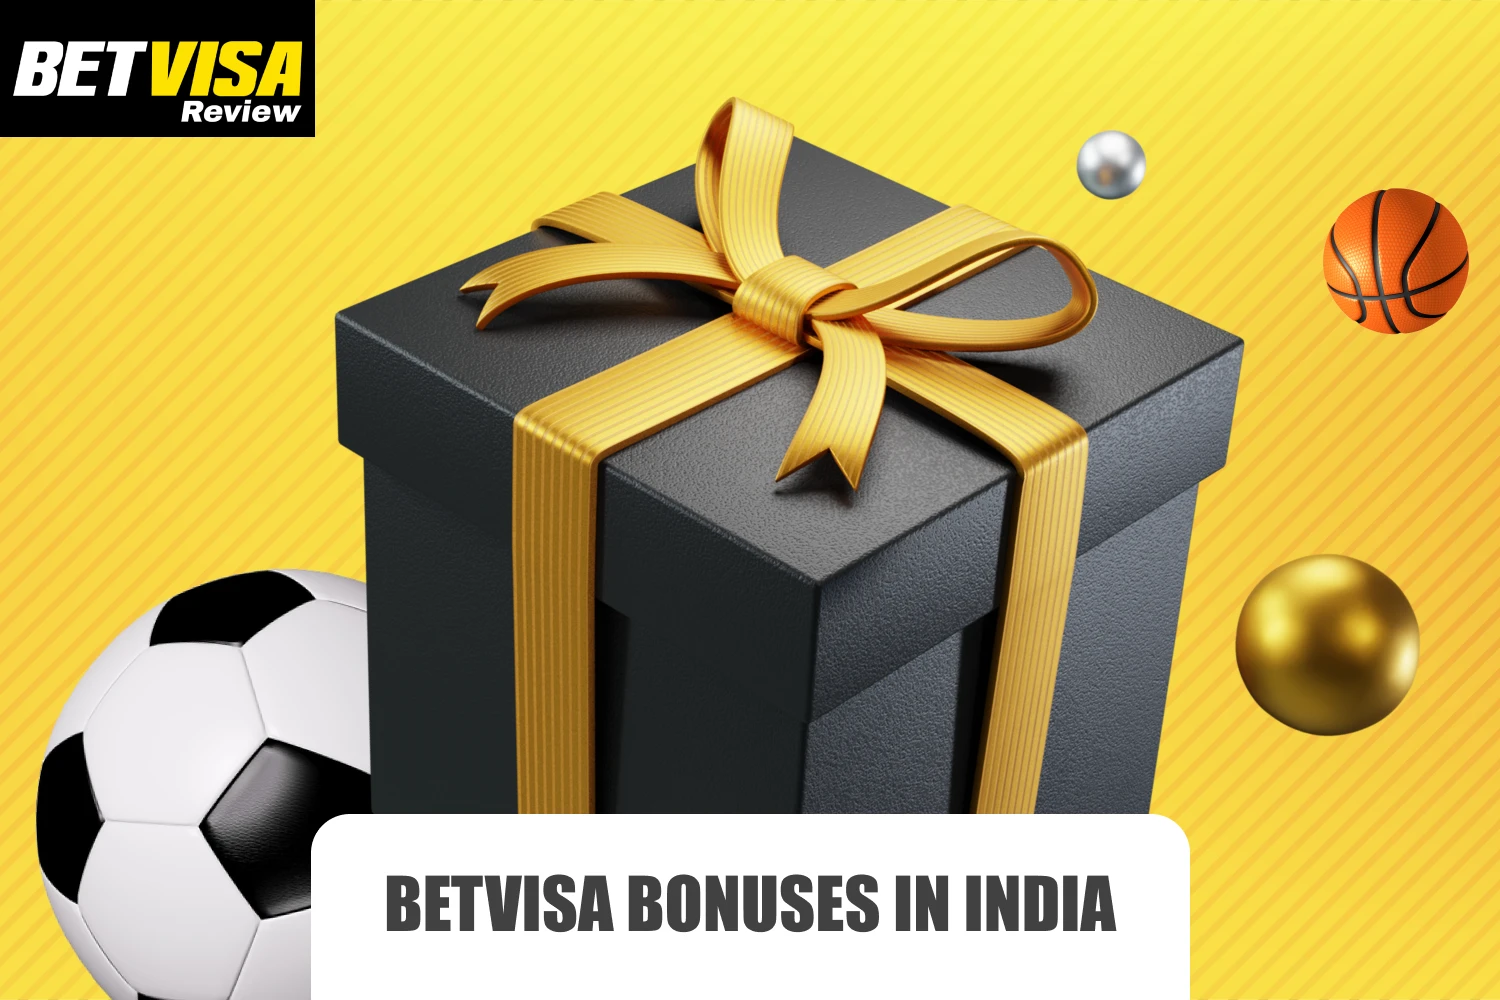 Betvisa offers attractive promotions targeting the Indian market